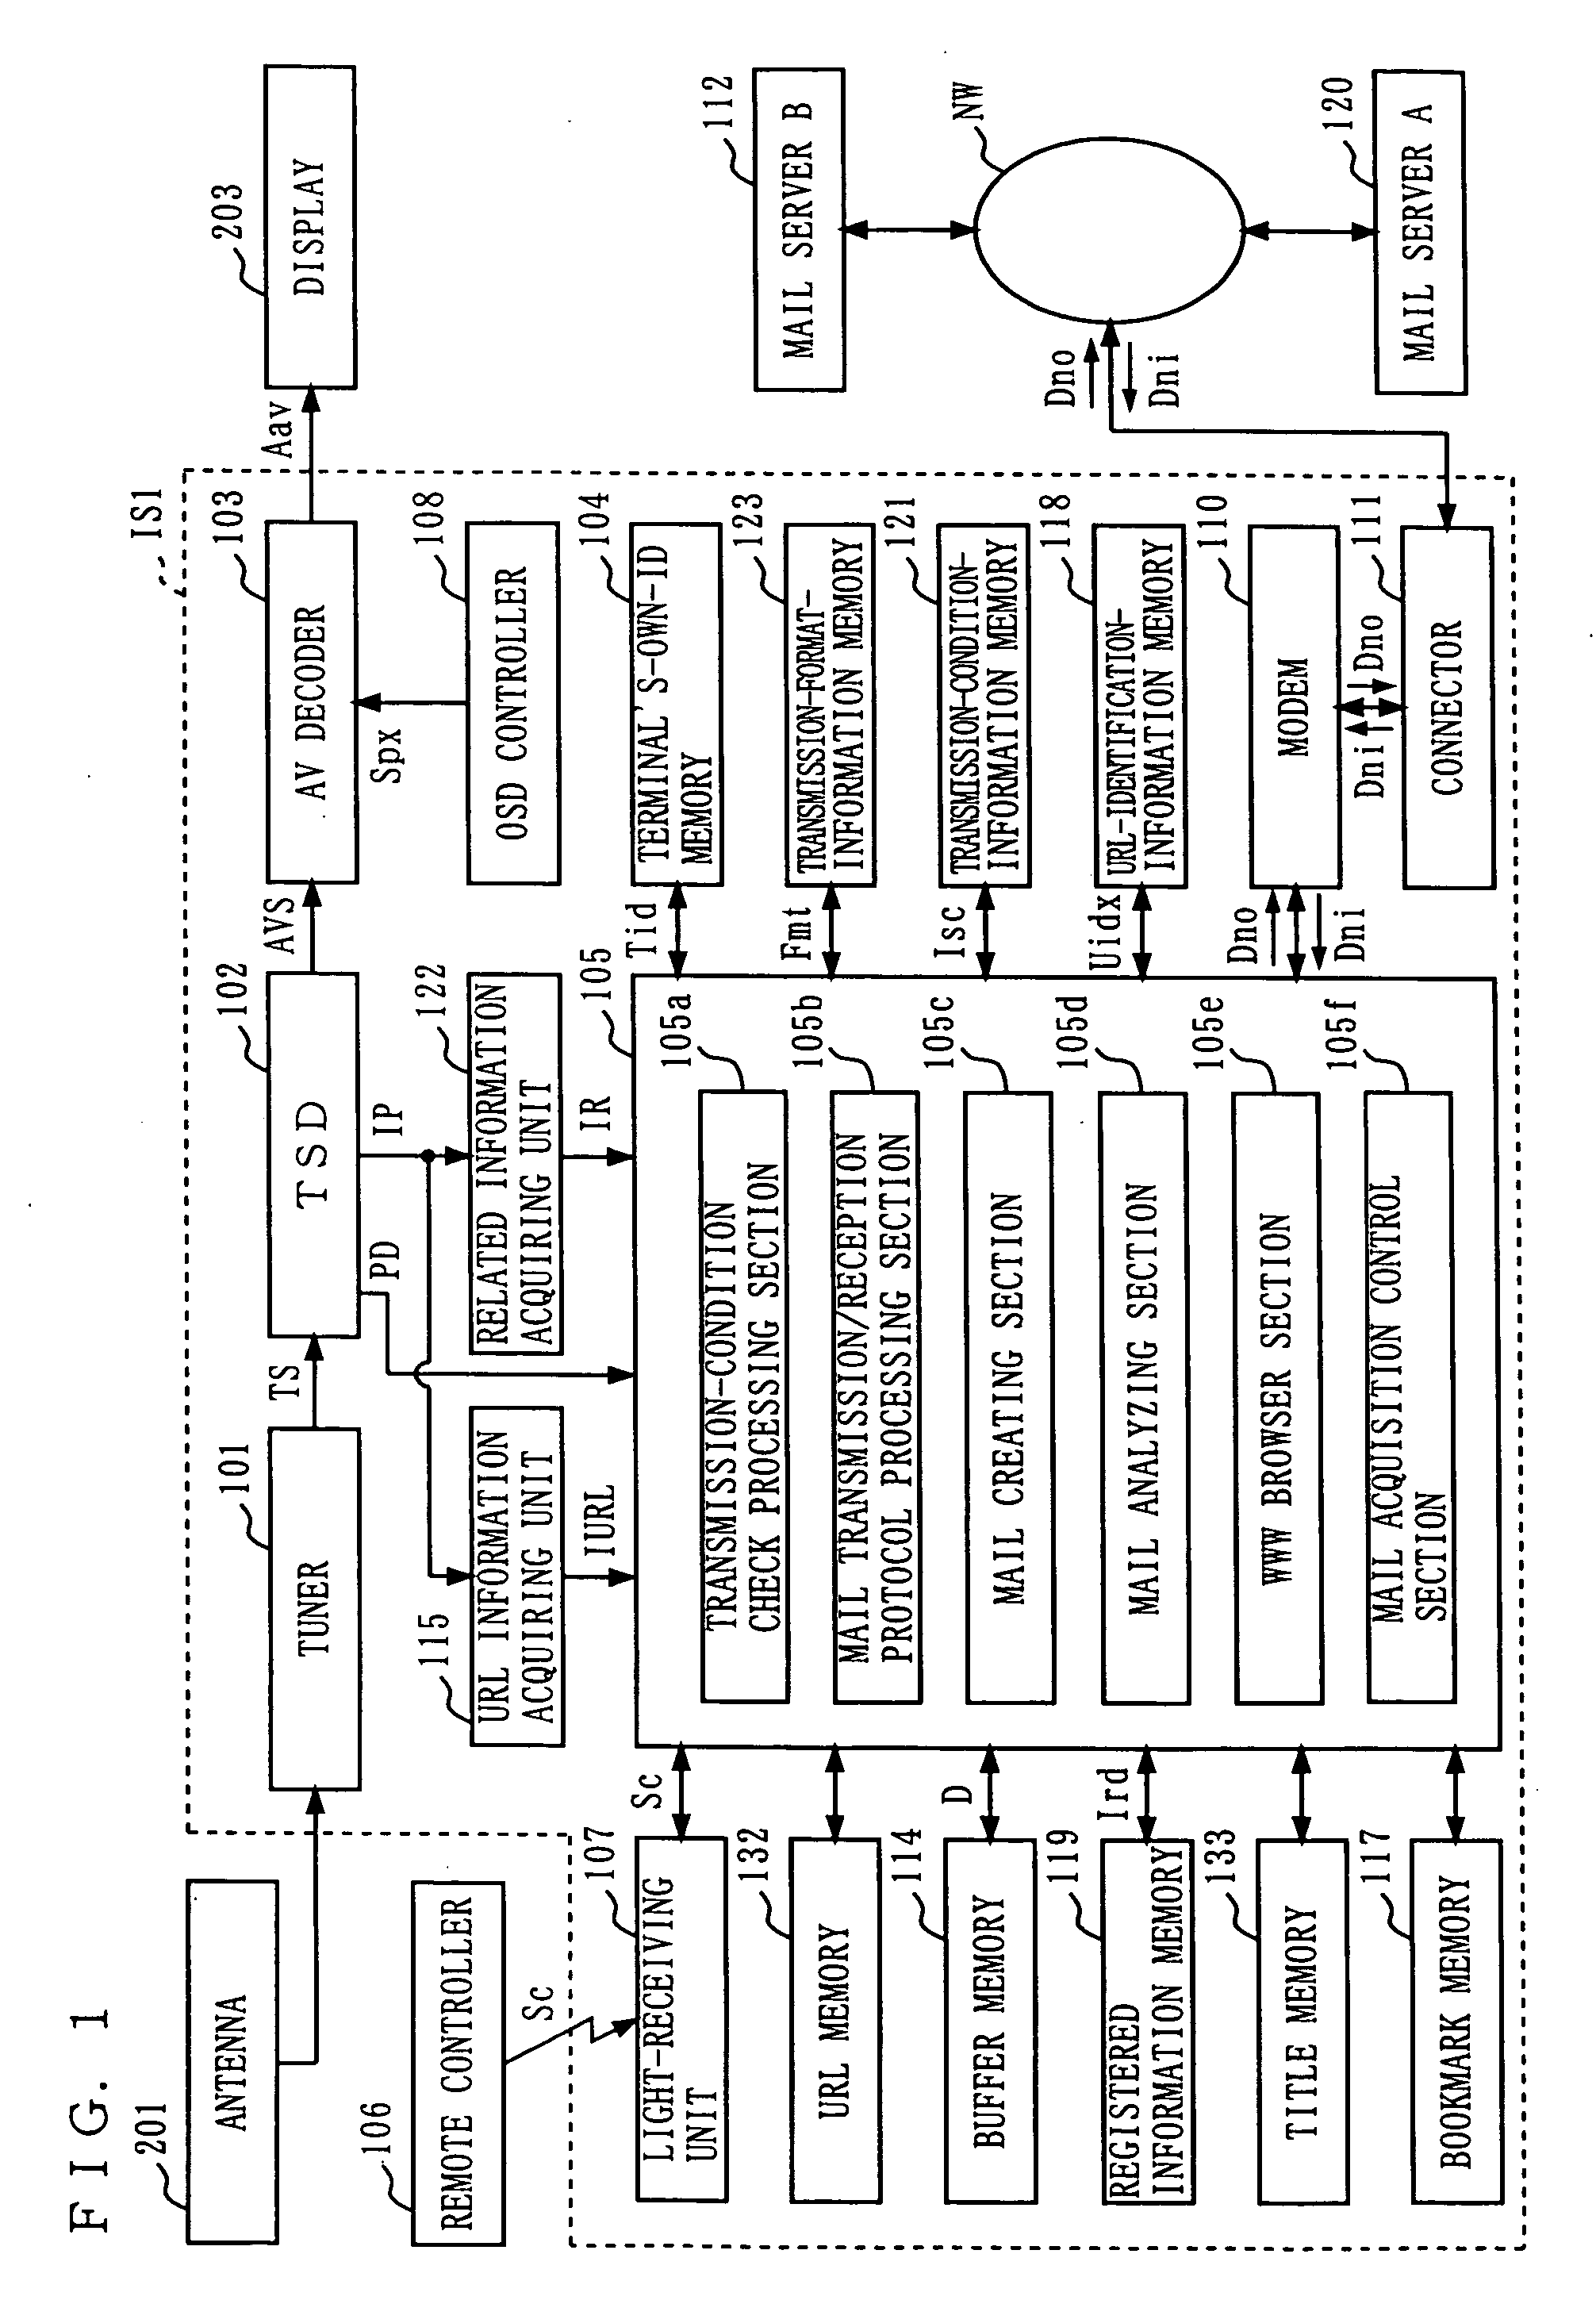 Information acquiring device and information providing device